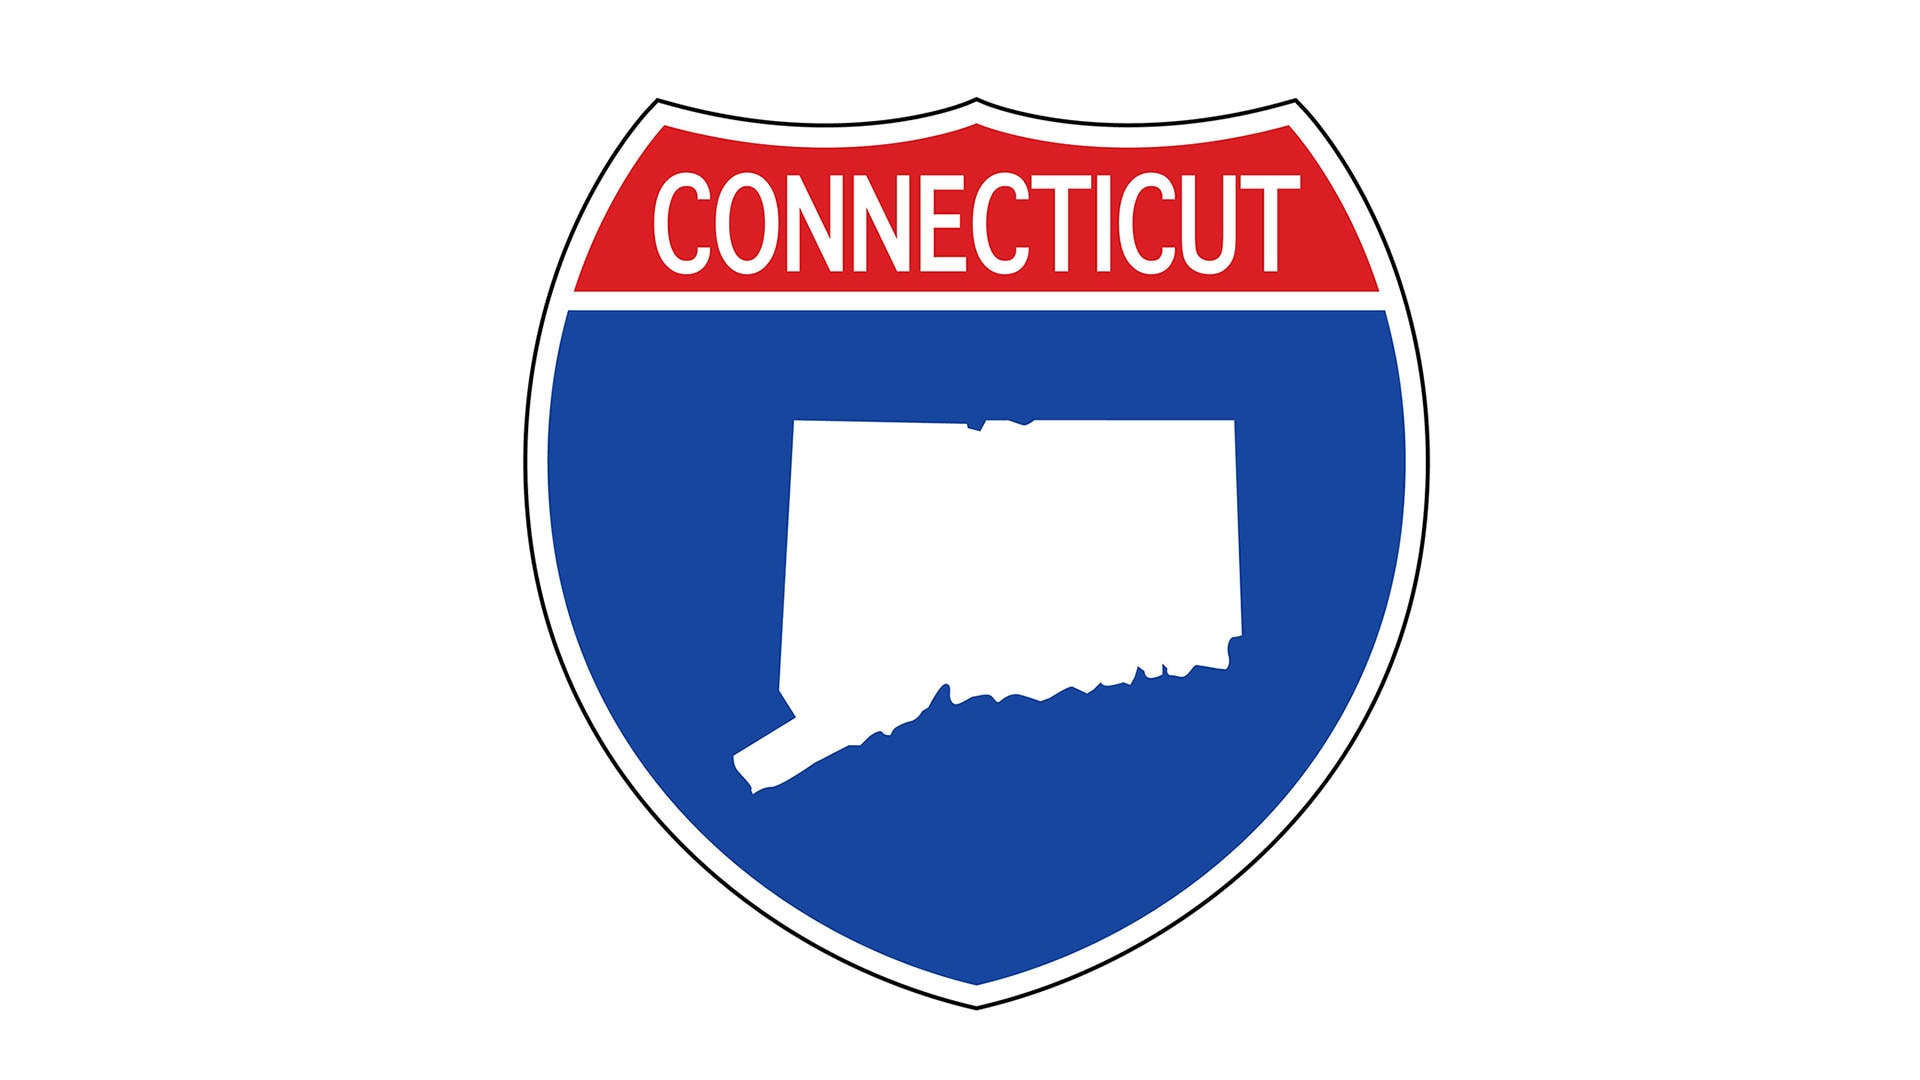 Connecticut state roadside sign